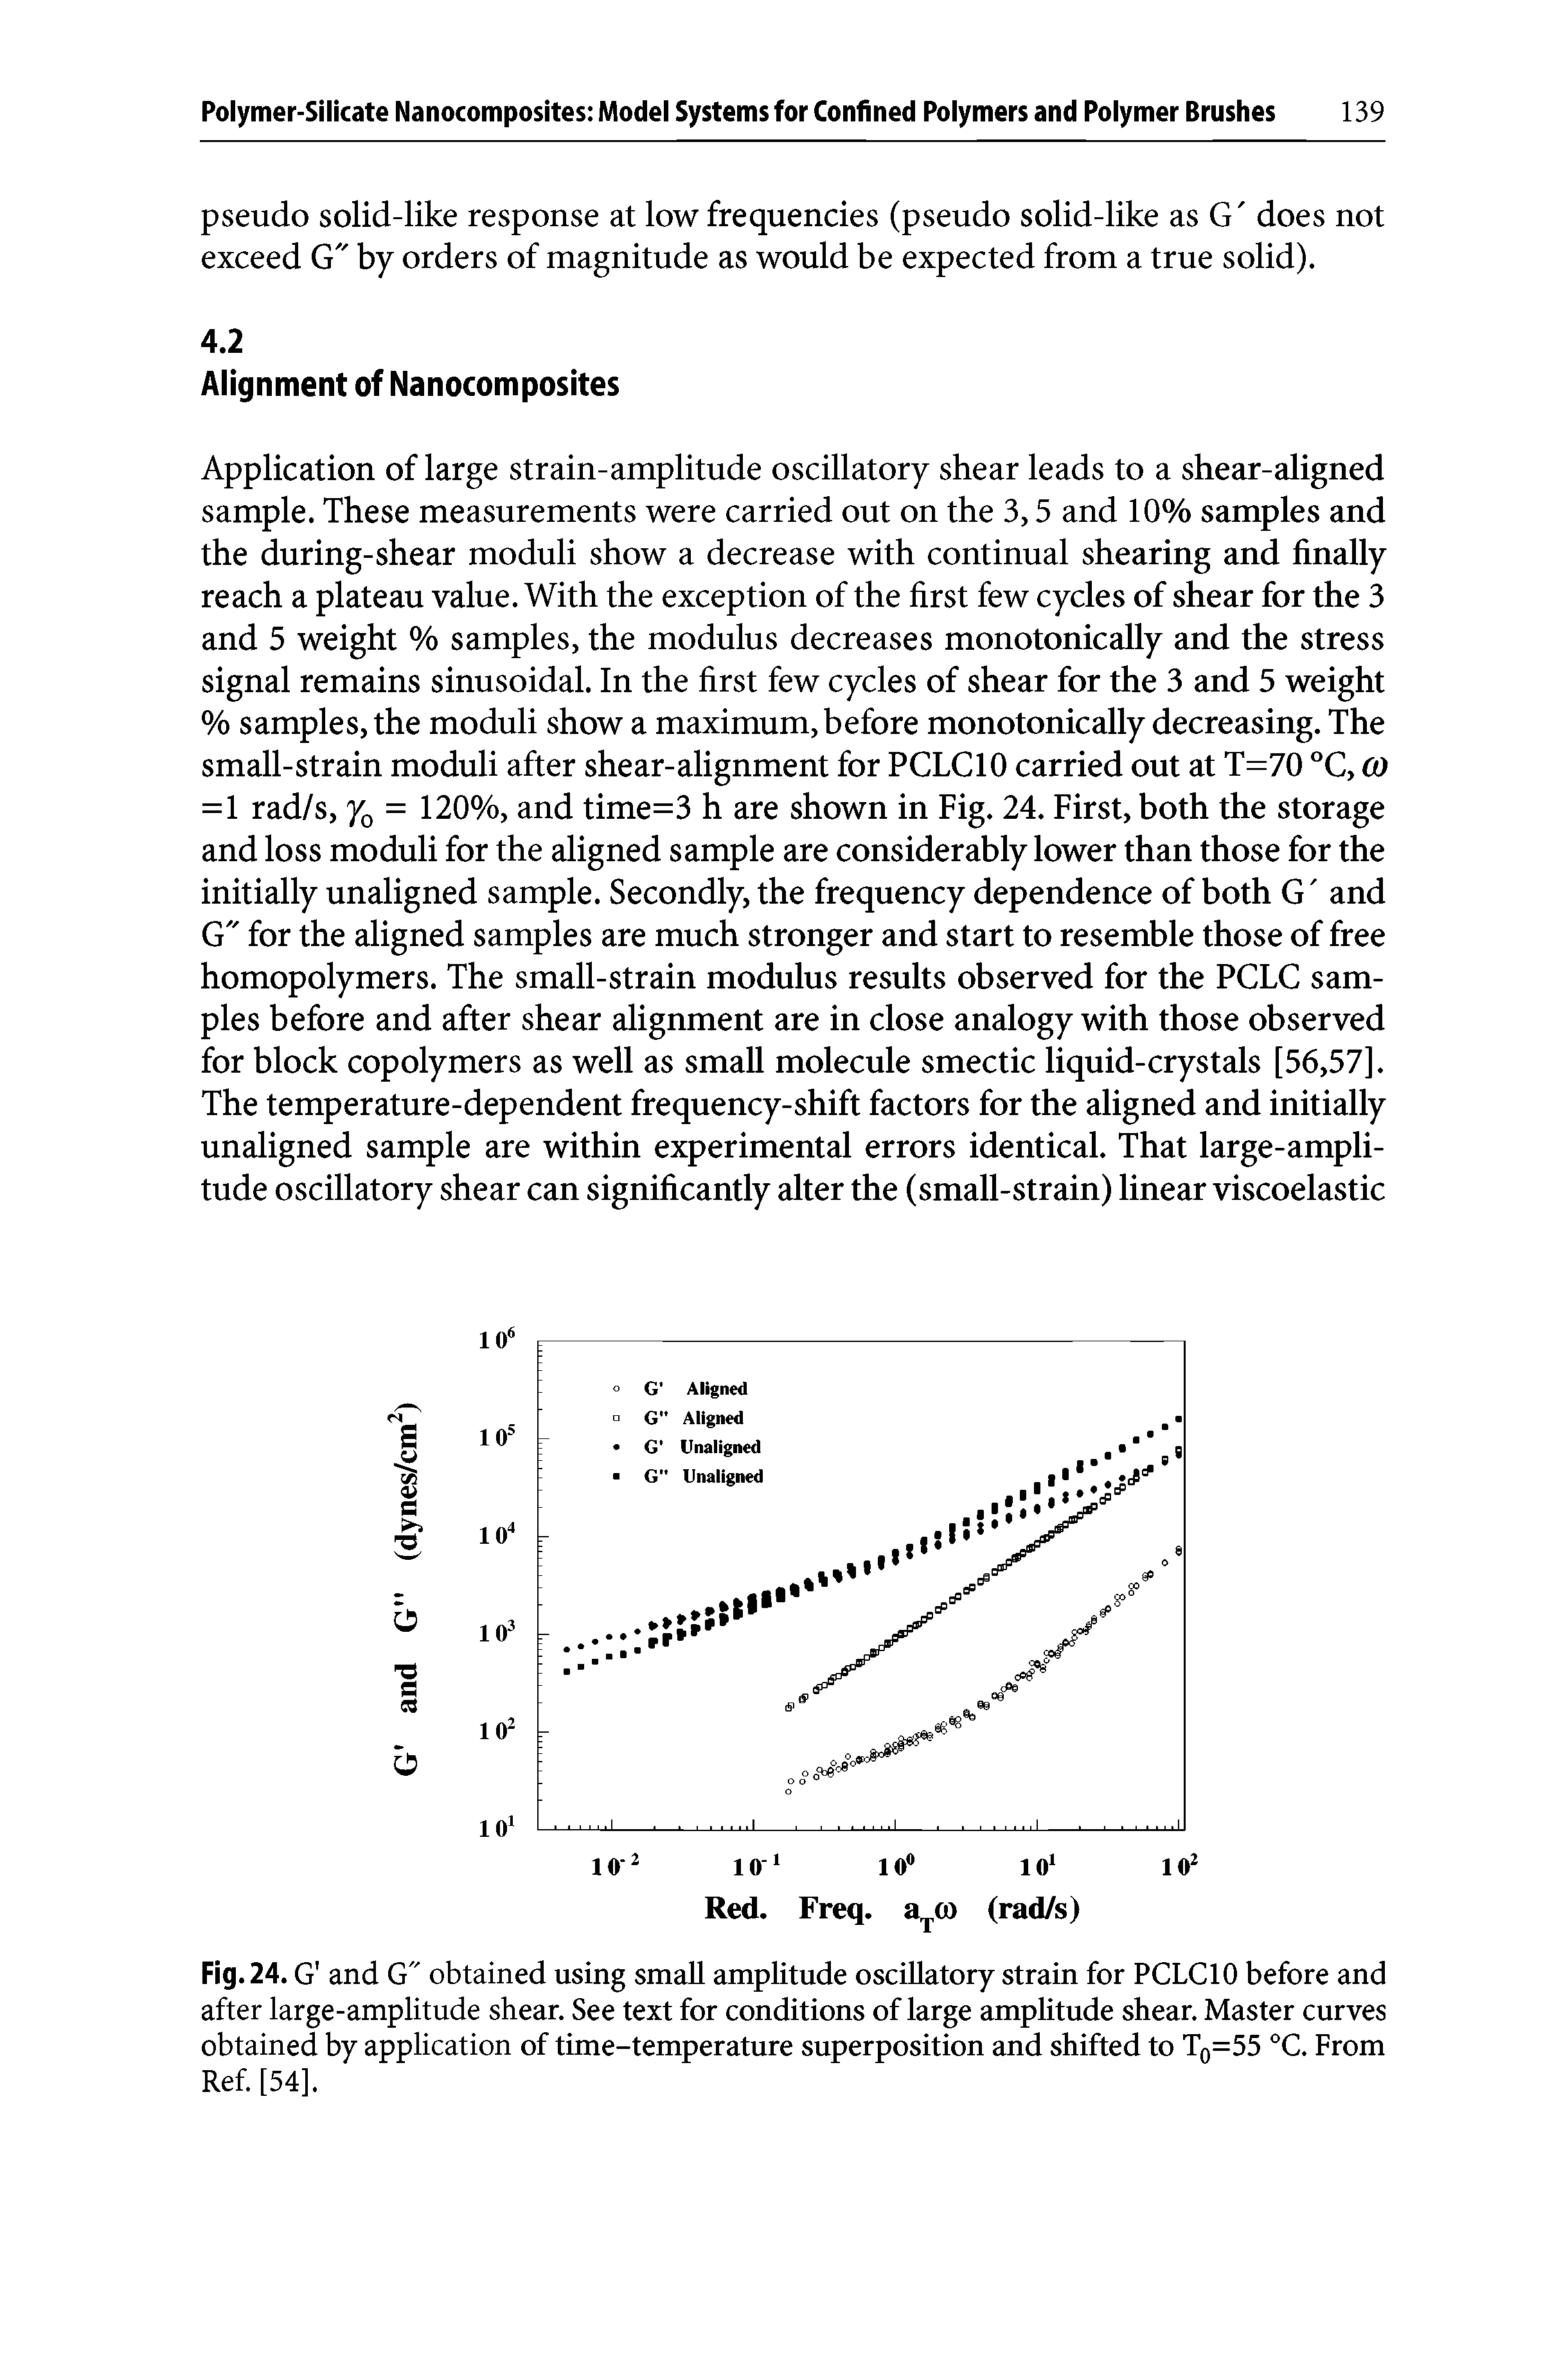 Fig. 24. G and G" obtained using small amplitude oscillatory strain for PCLC10 before and after large-amplitude shear. See text for conditions of large amplitude shear. Master curves obtained by application of time-temperature superposition and shifted to T0=55 °C. From Ref. [54].